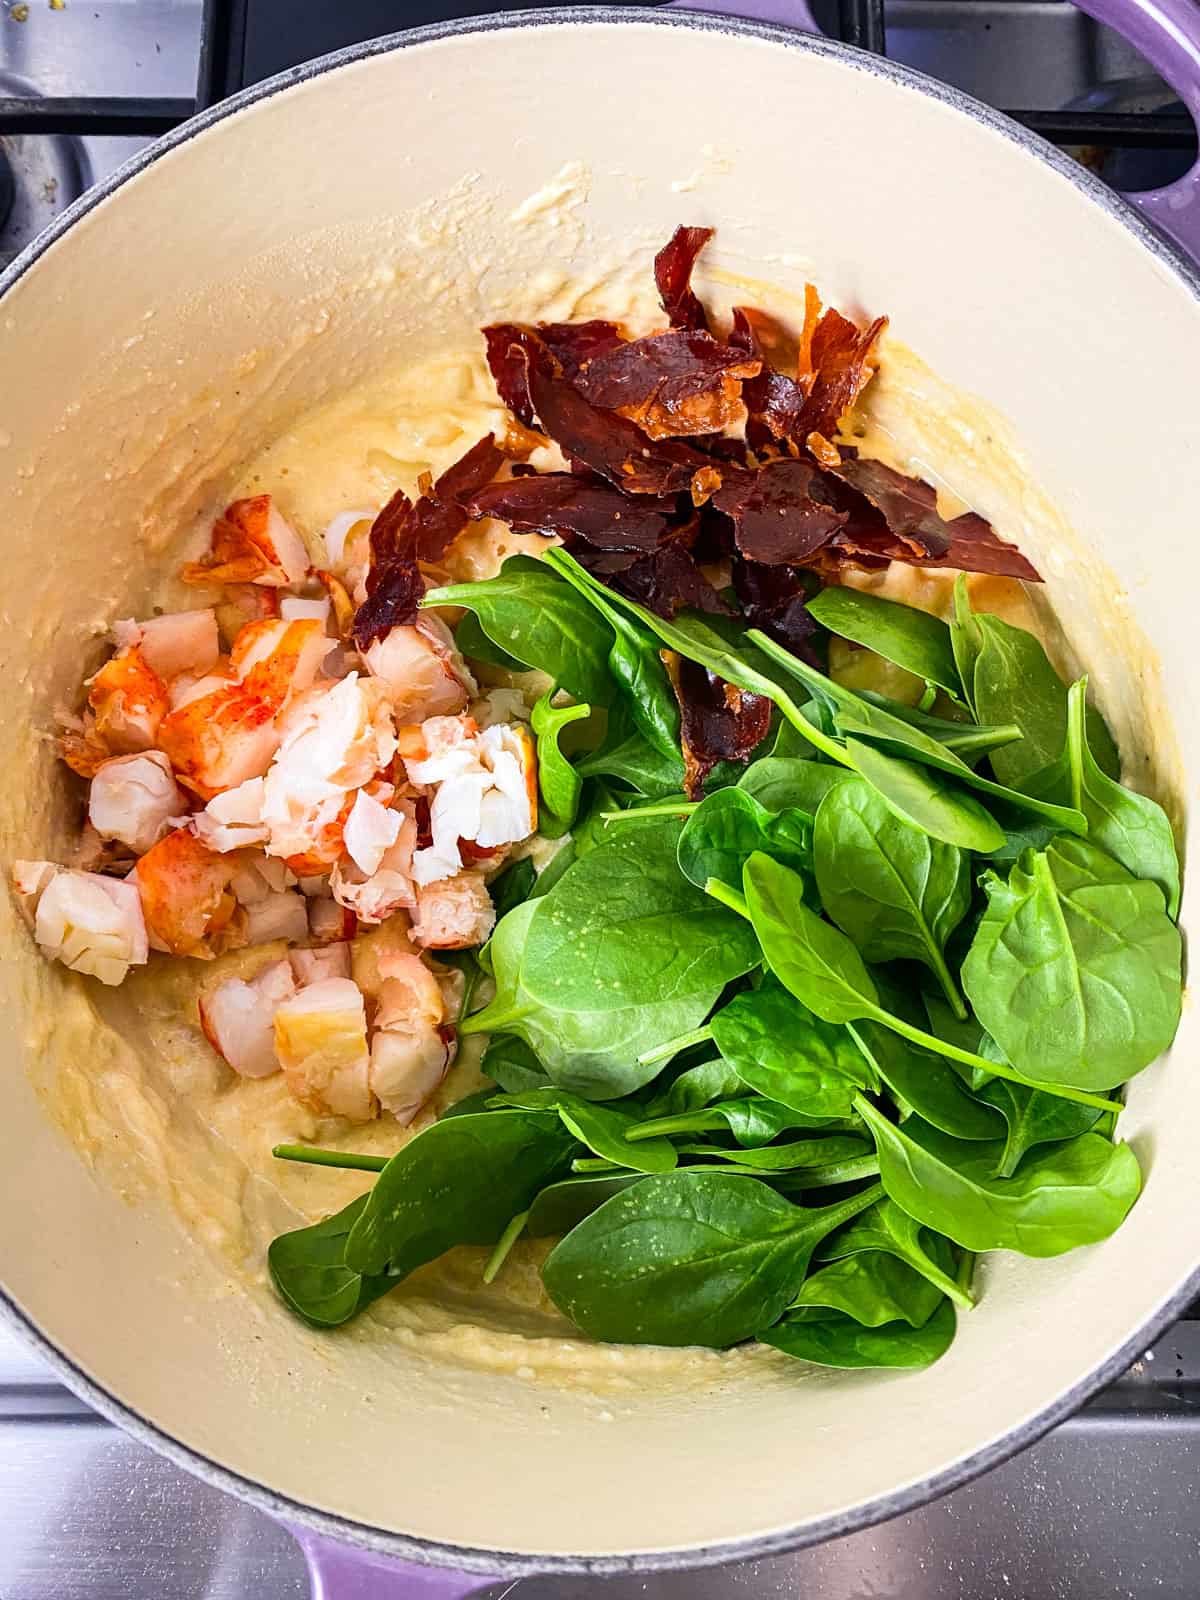 Add the lobster, prosciutto and spinach to the mac and cheese.